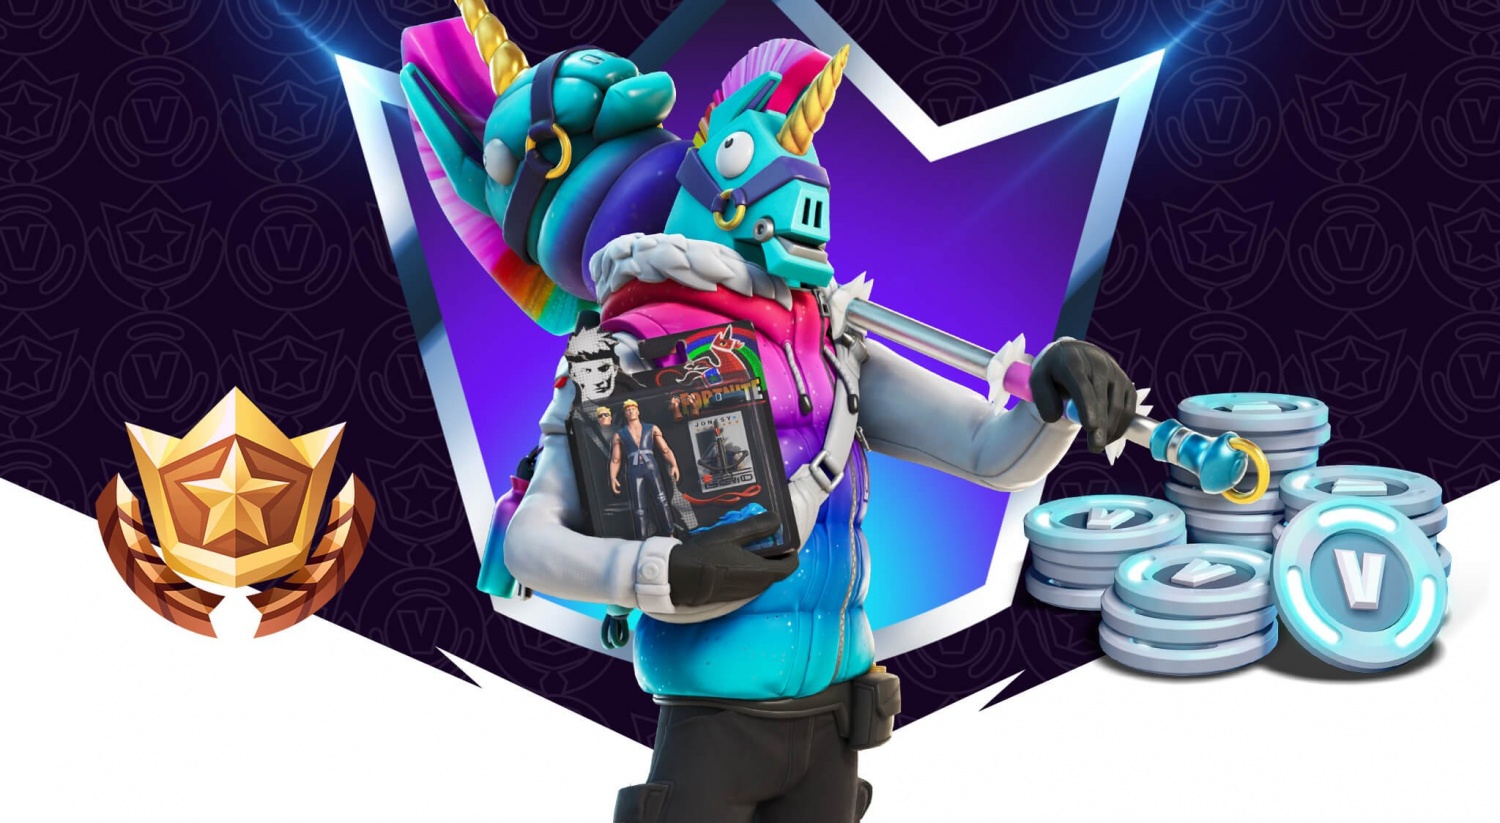 'Fortnite' Season 6 Early Leaks List: Battle Pass Skins, Weapons and More!